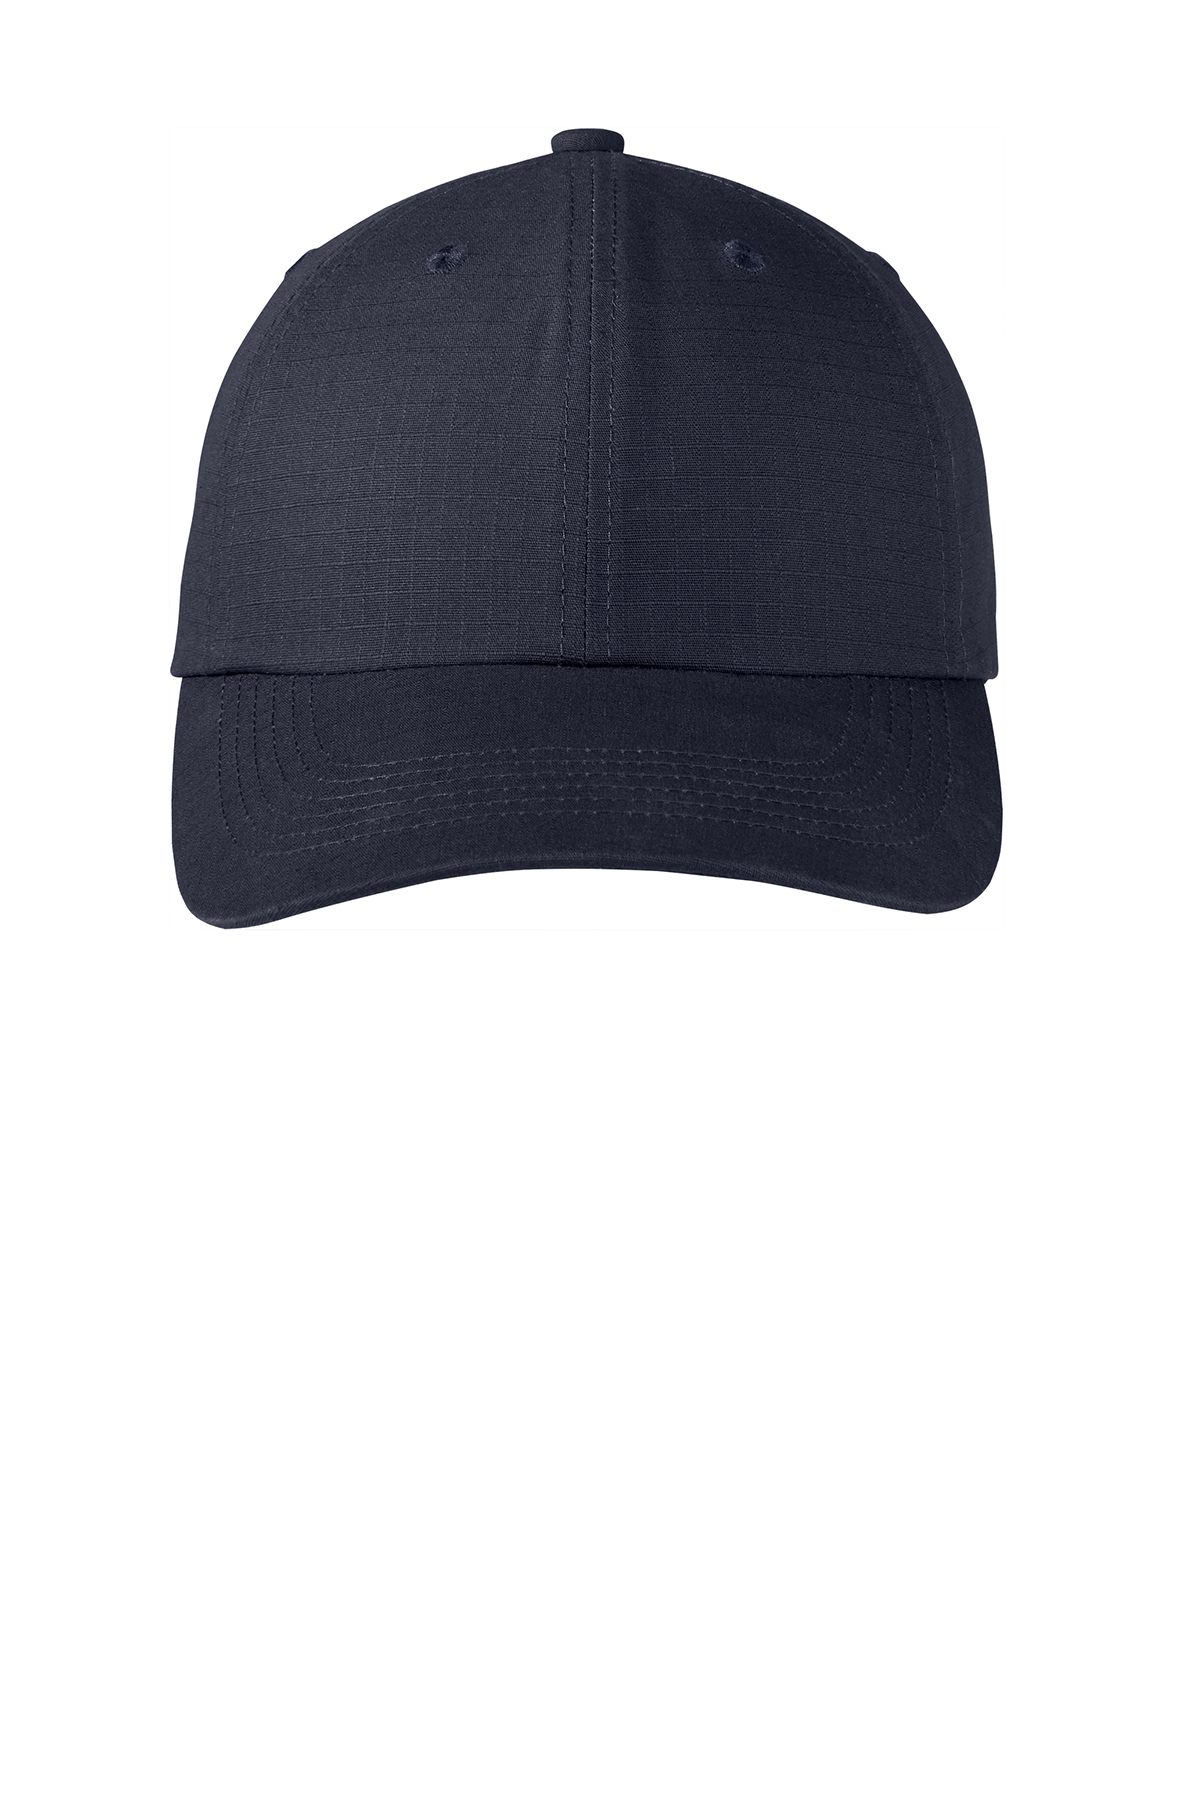 Port Authority Ripstop Cap | Product | Company Casuals